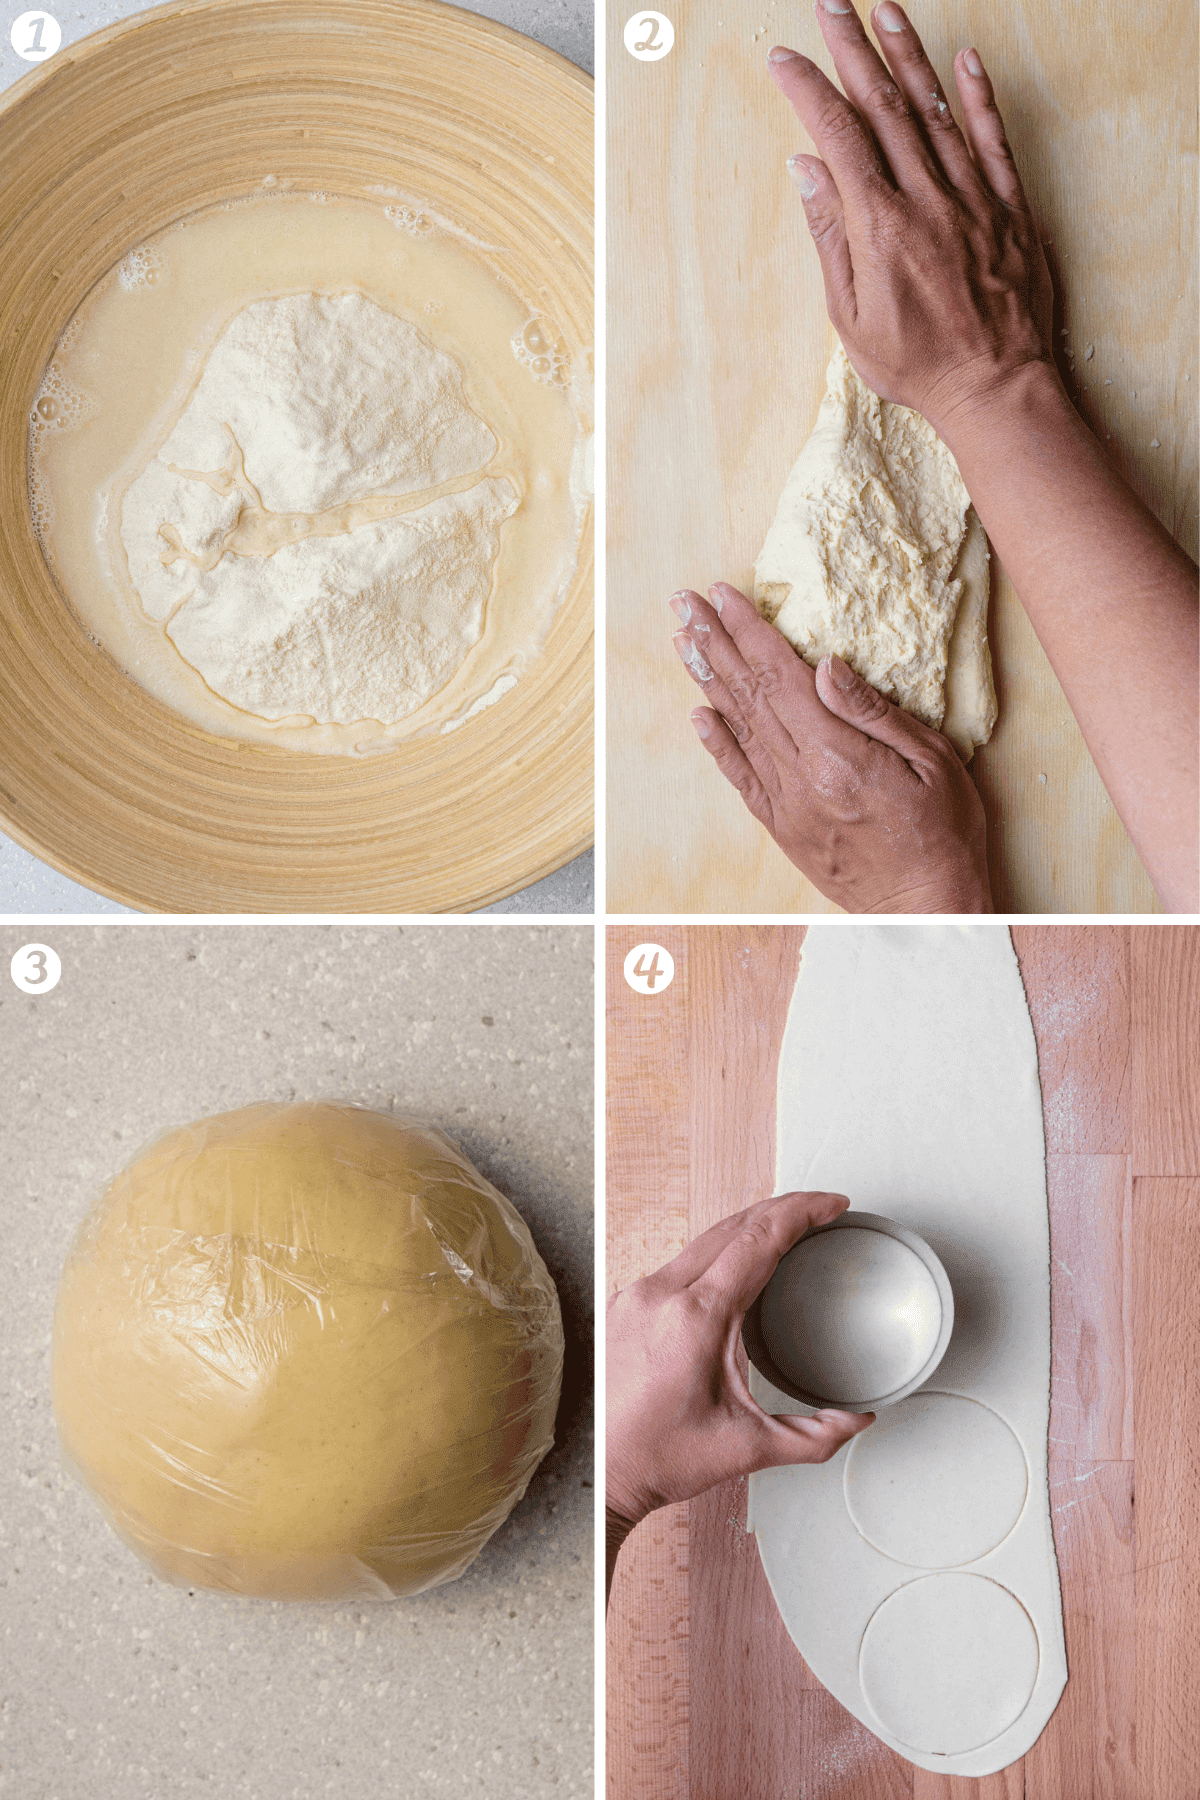 Steps on how to prepare the pasta dough